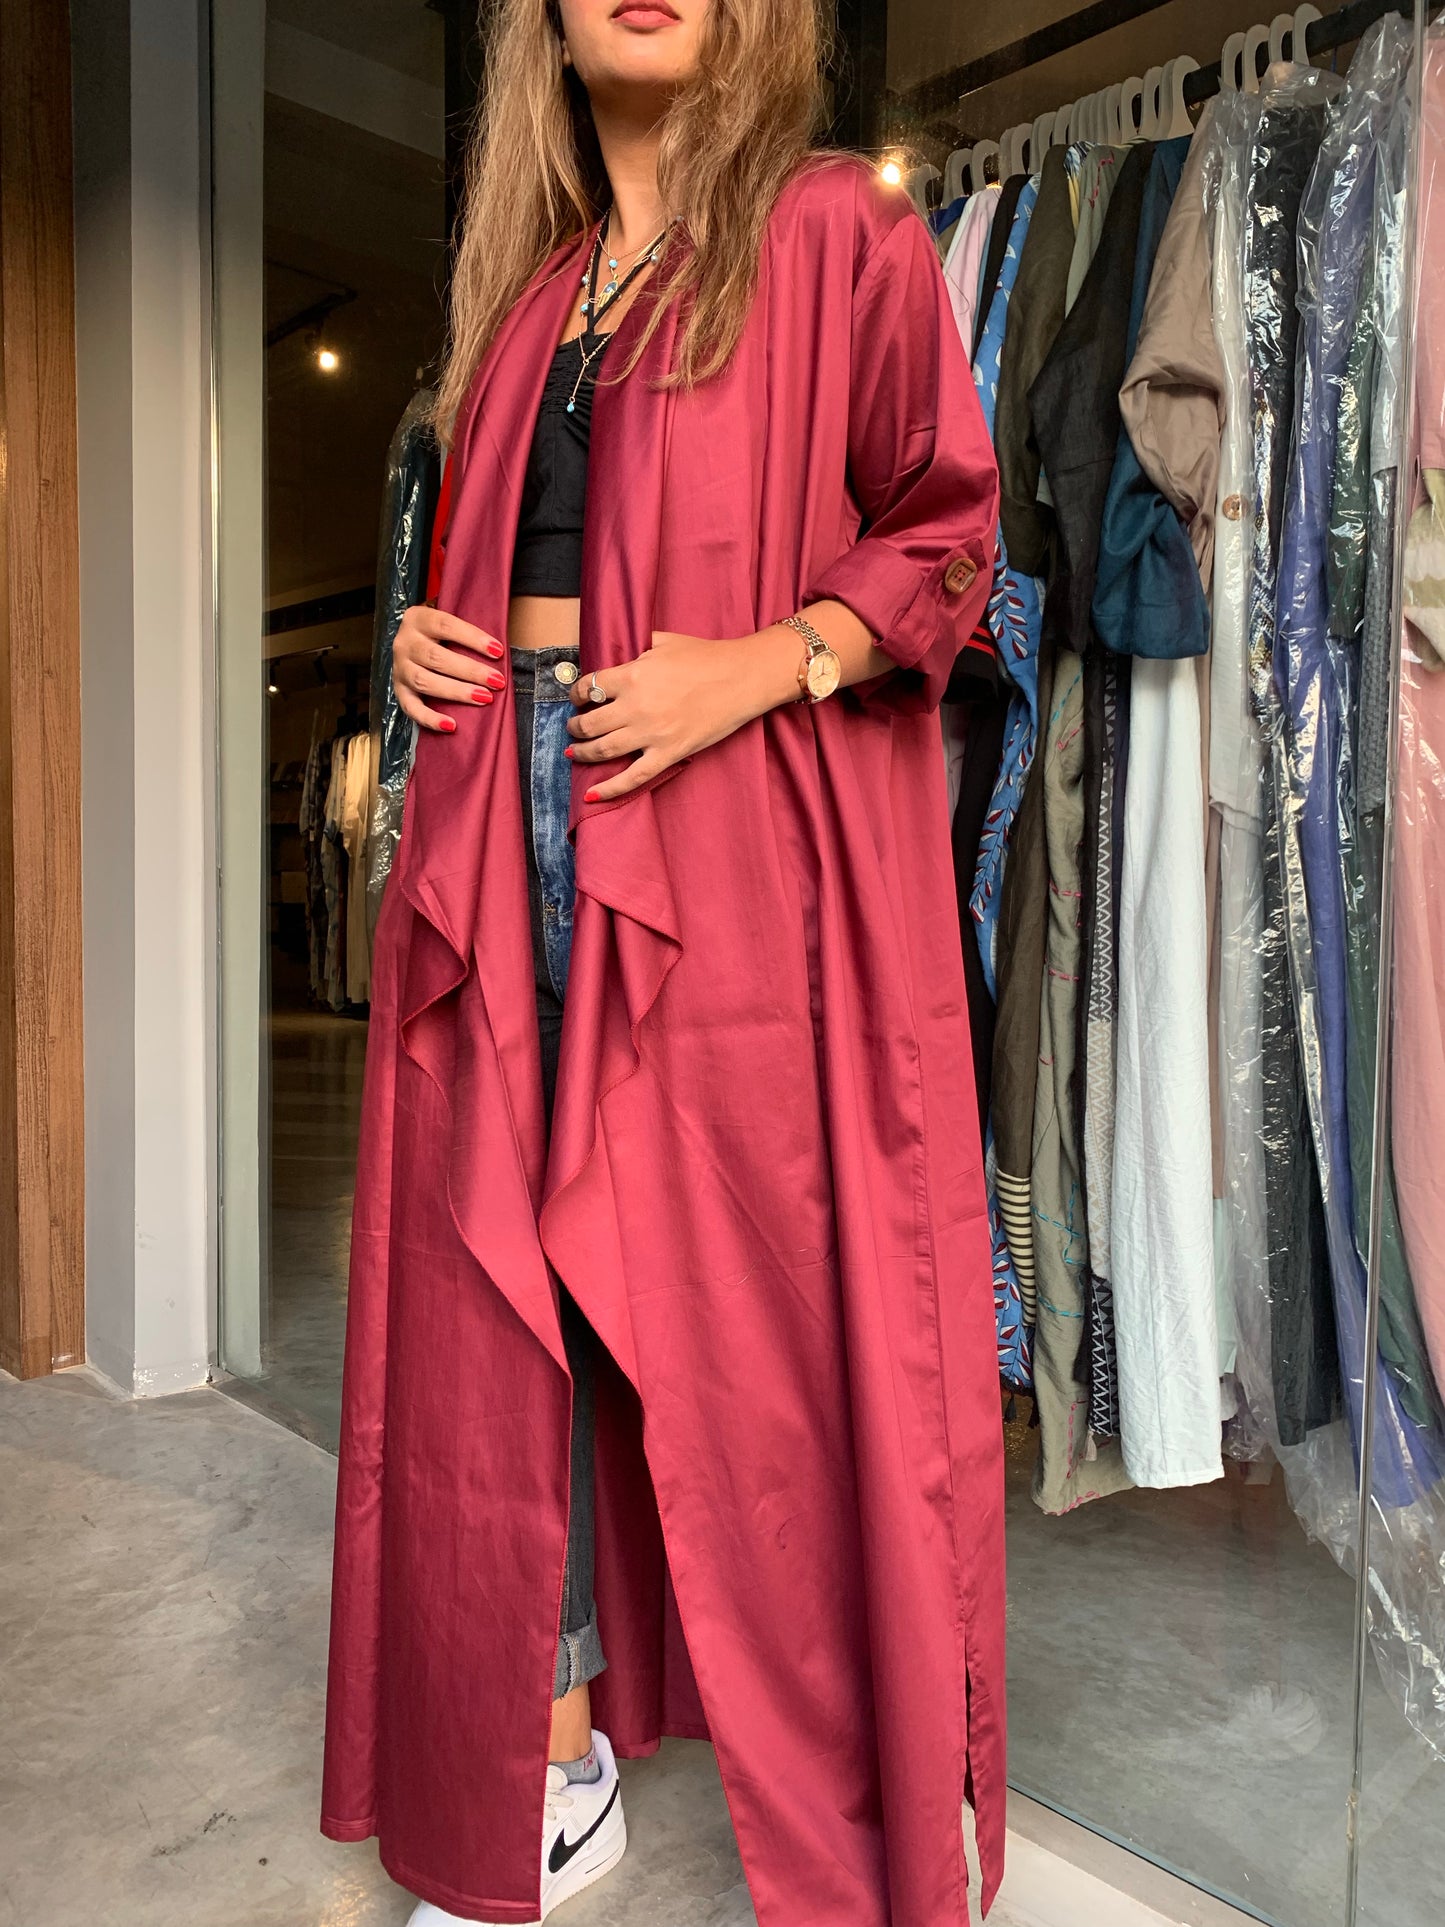 The Trend Setter - Cotton Cardigan Abaya - The Untitled Project